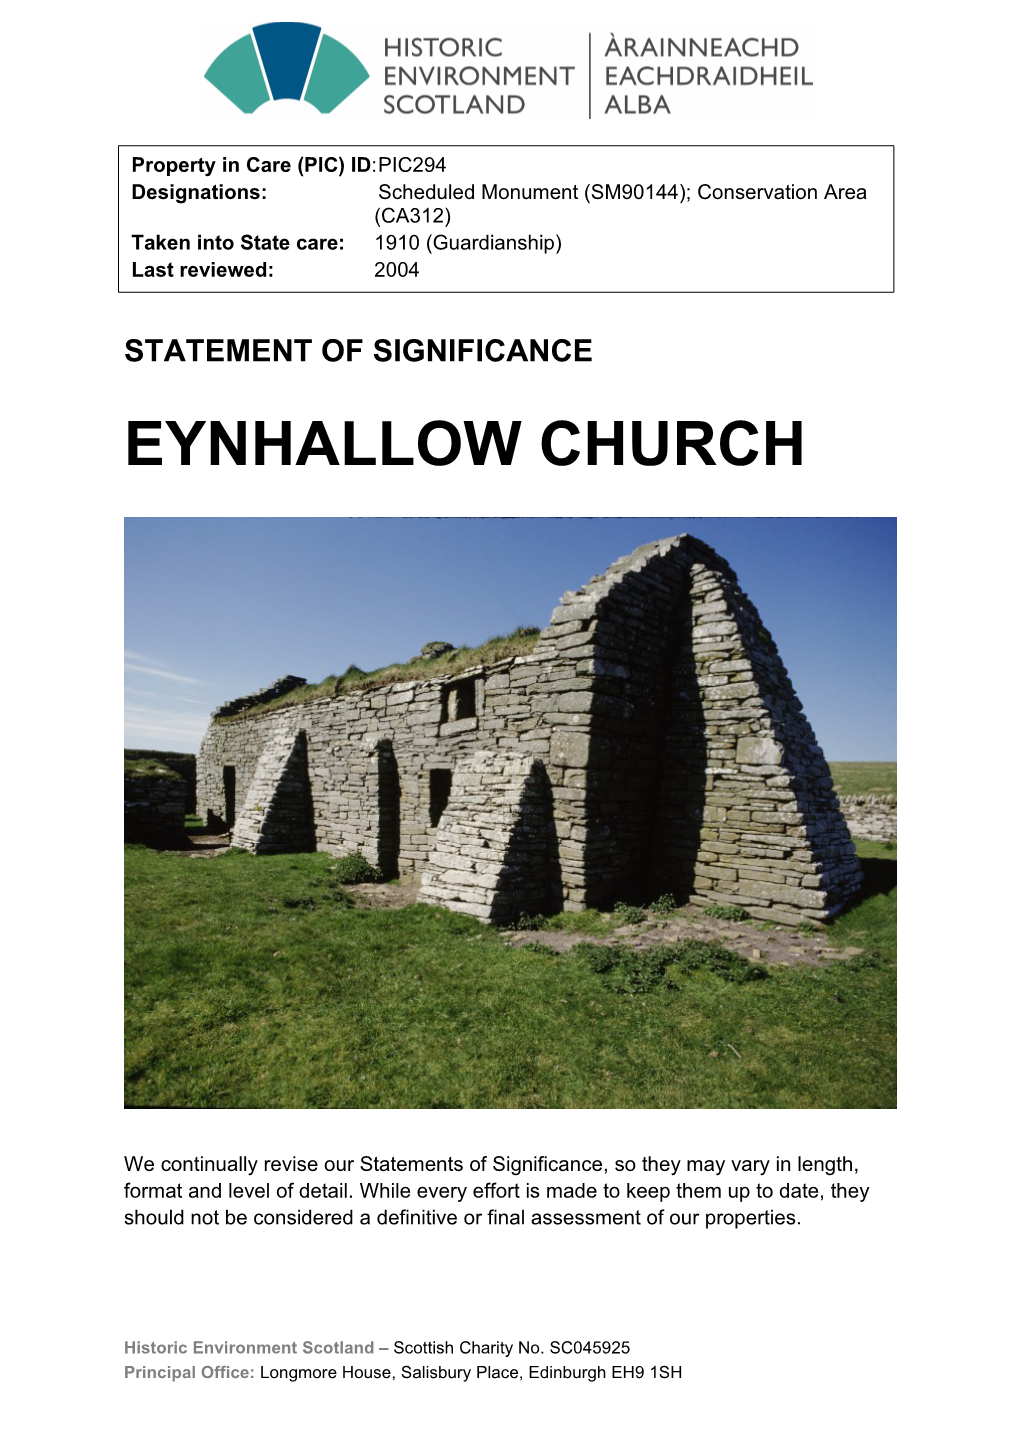 Eynhallow Church Statement of Significance